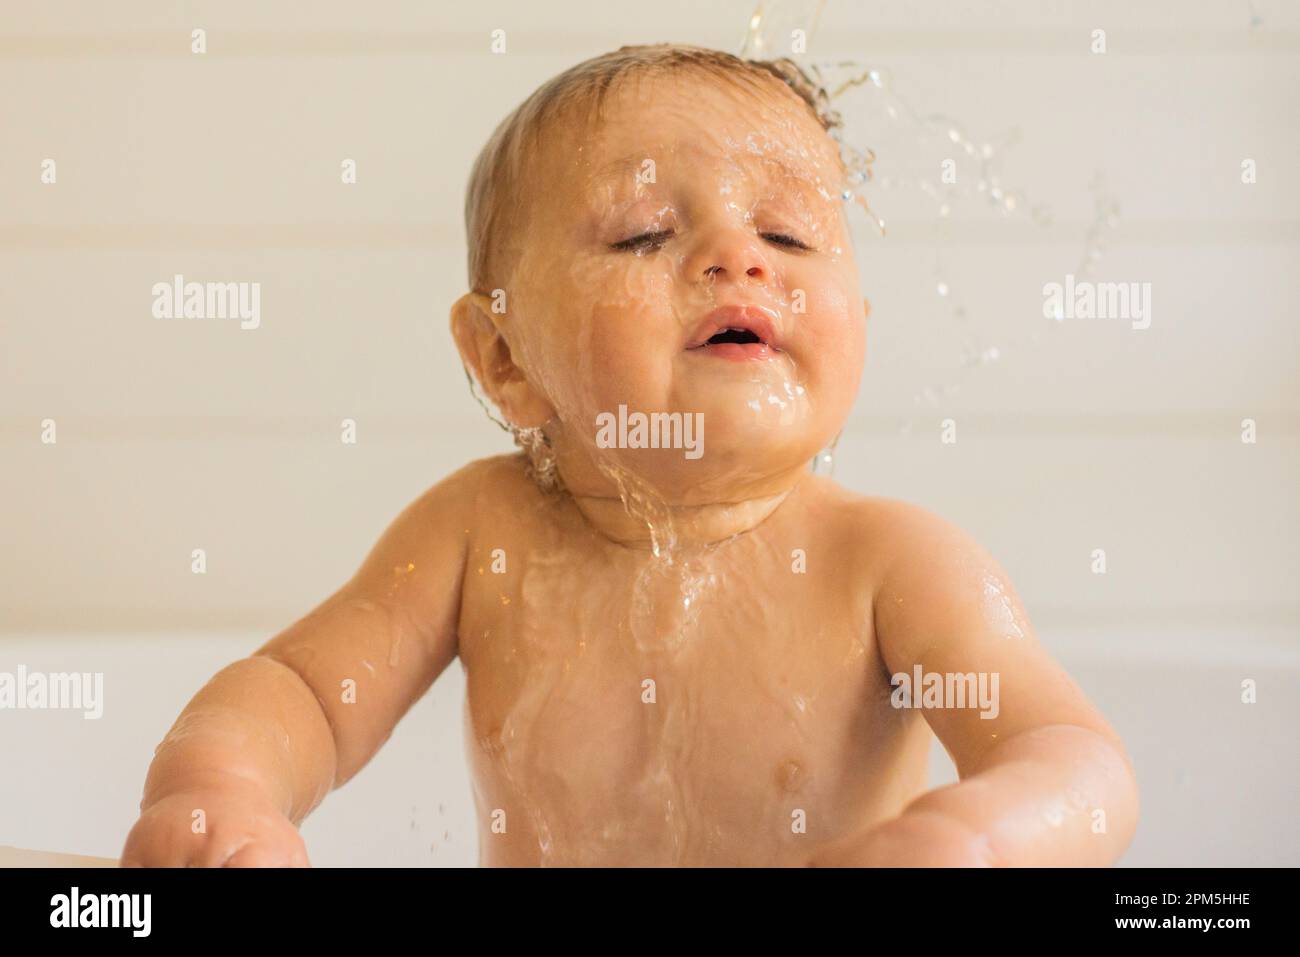 A Baby's first year celebration Stock Photo